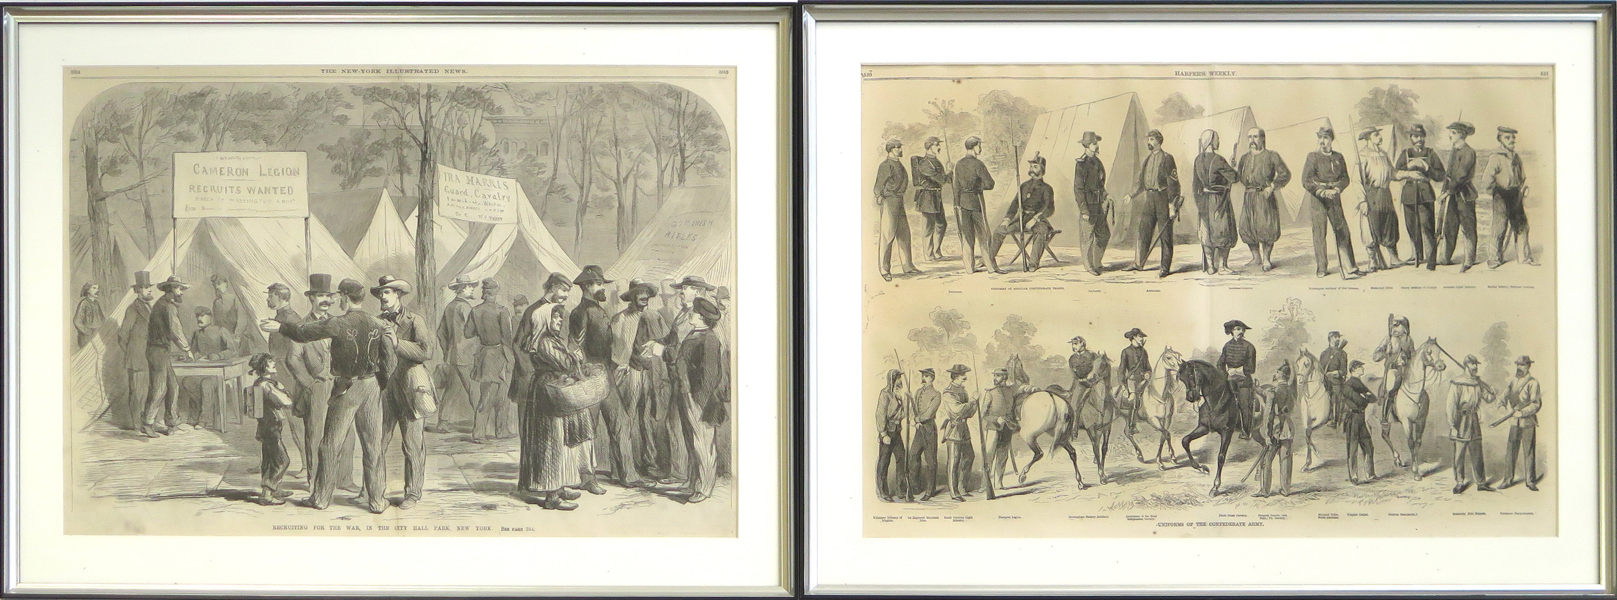 Litografier, 2 st: Amerikanska Inbördeskriget; "Uniforms of the Confederate Army" ur  "Harper's weekly" 17/8 1861 samt "Recruiting for the war, in the City Hall Park, New York" _27511a_lg.jpeg